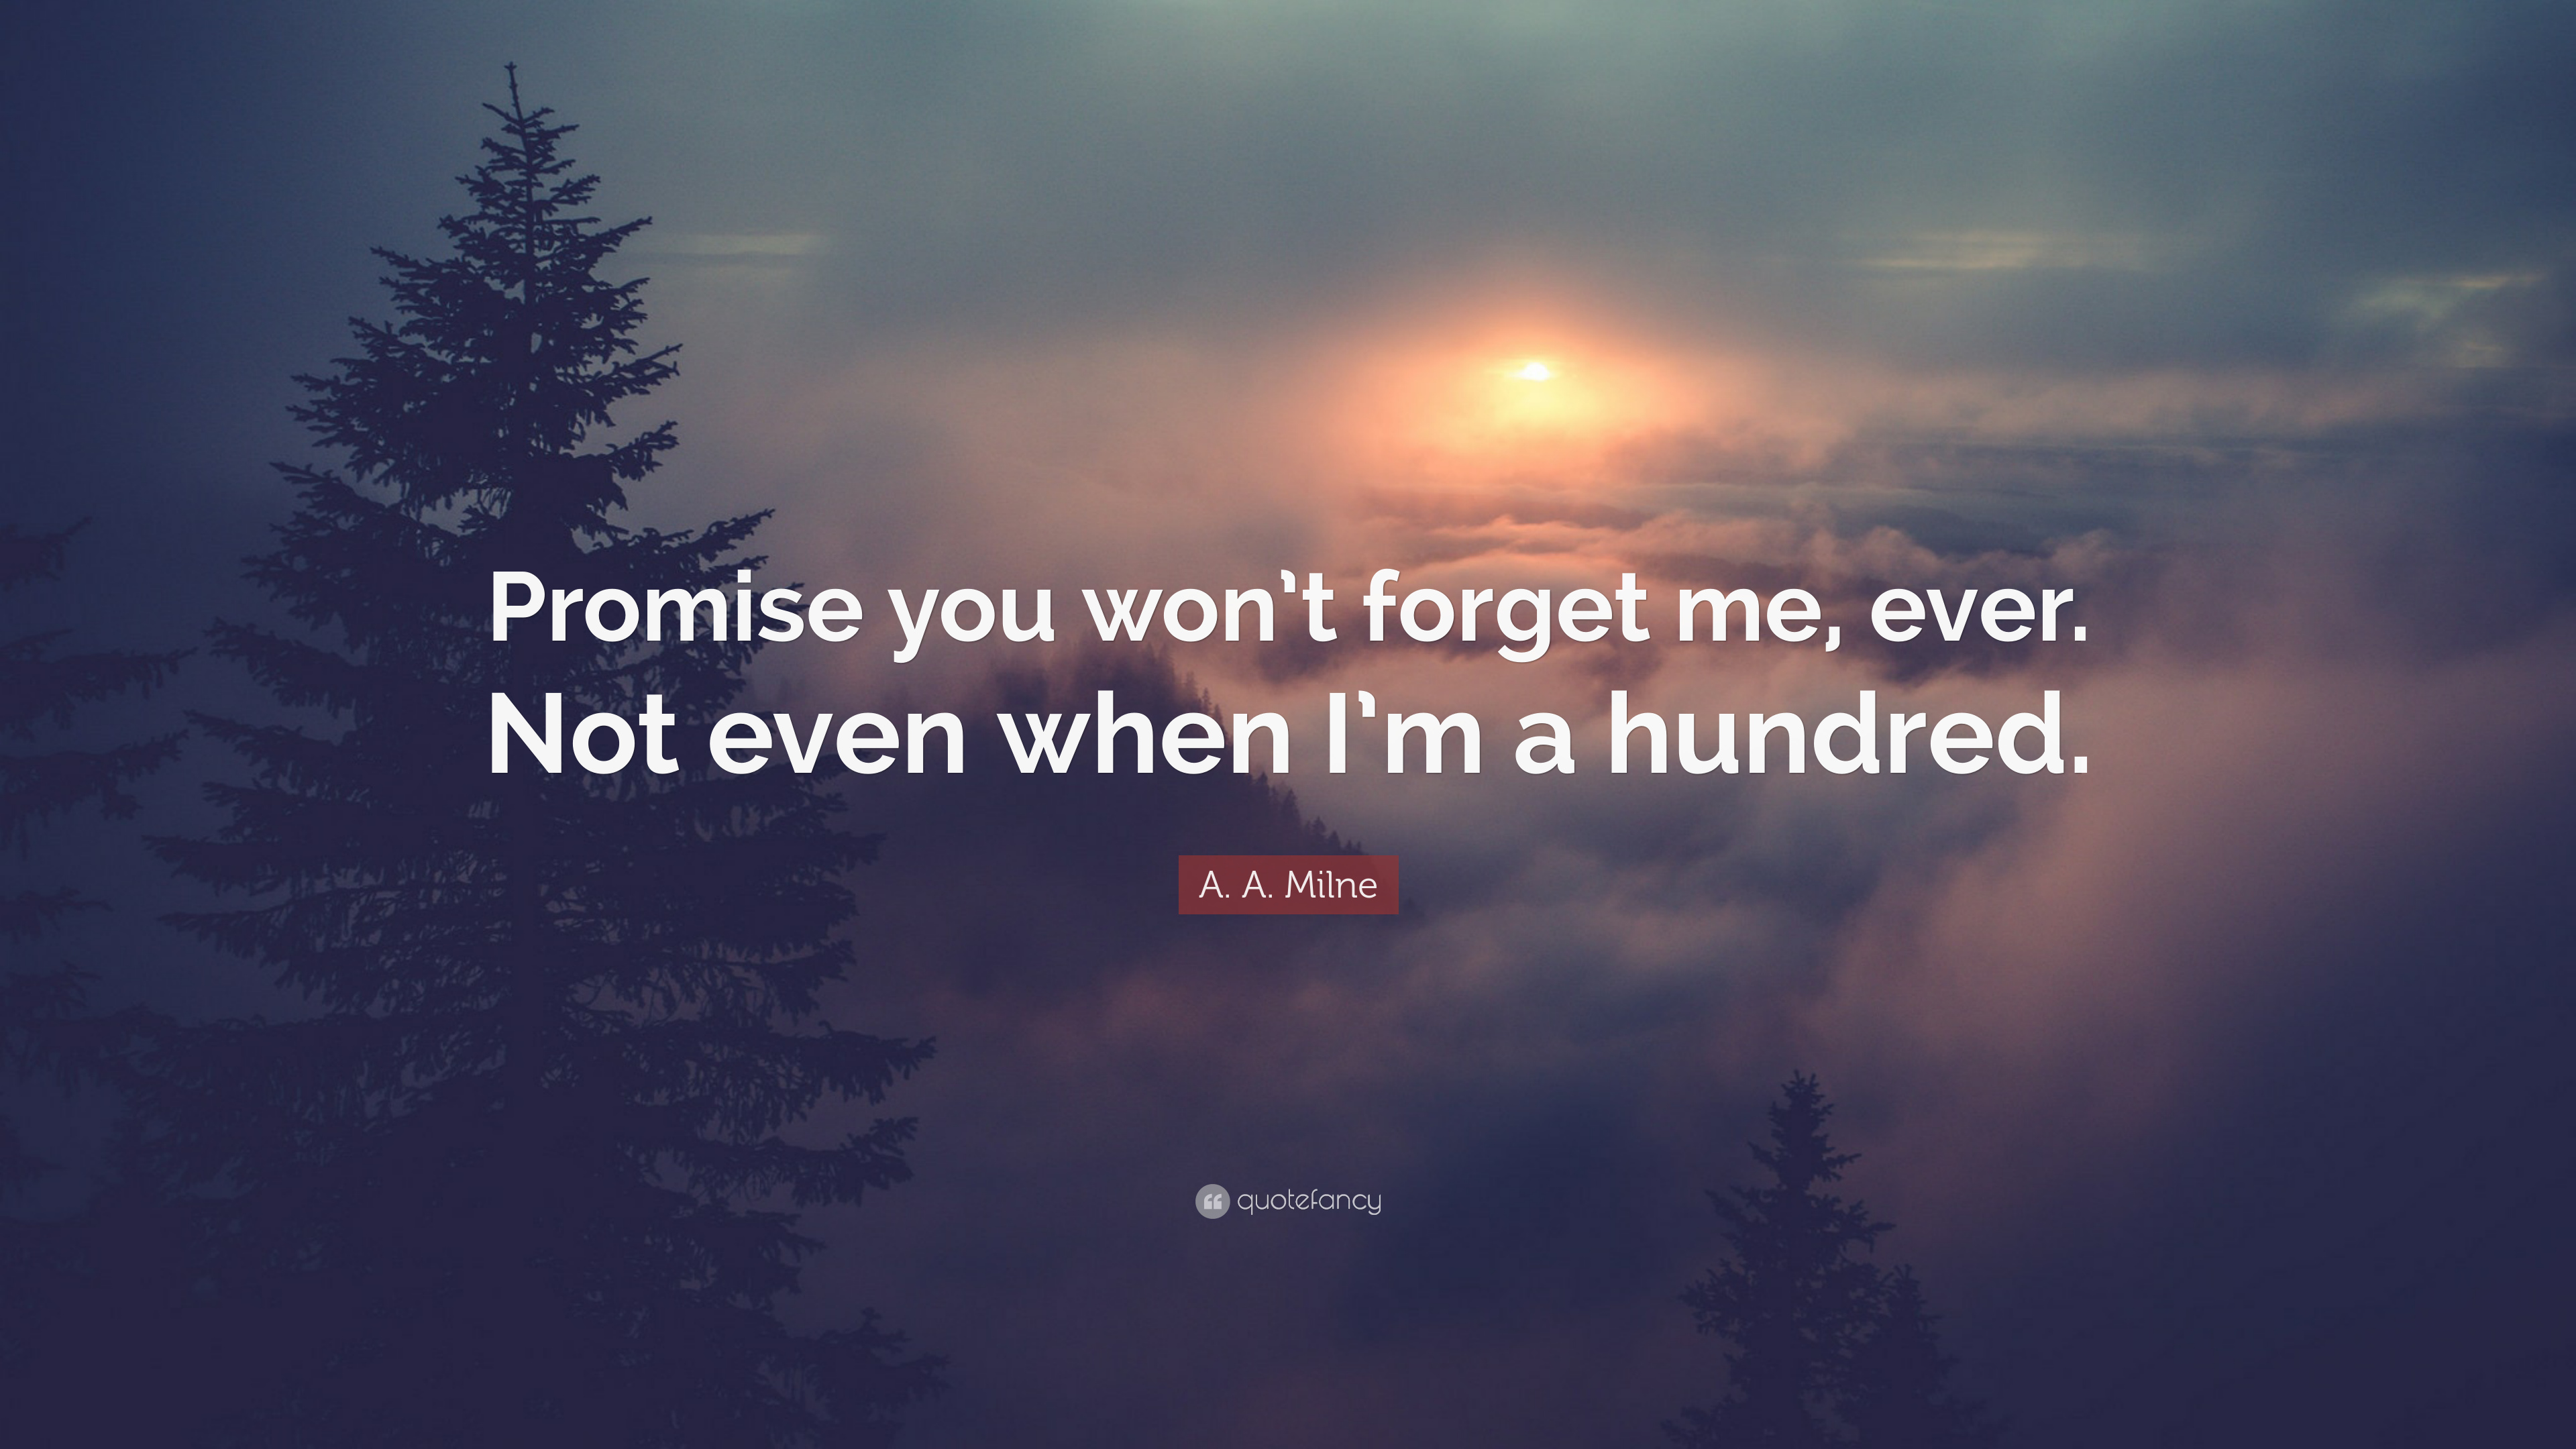 A. A. Milne Quote: “Promise you won't forget me, ever. Not even